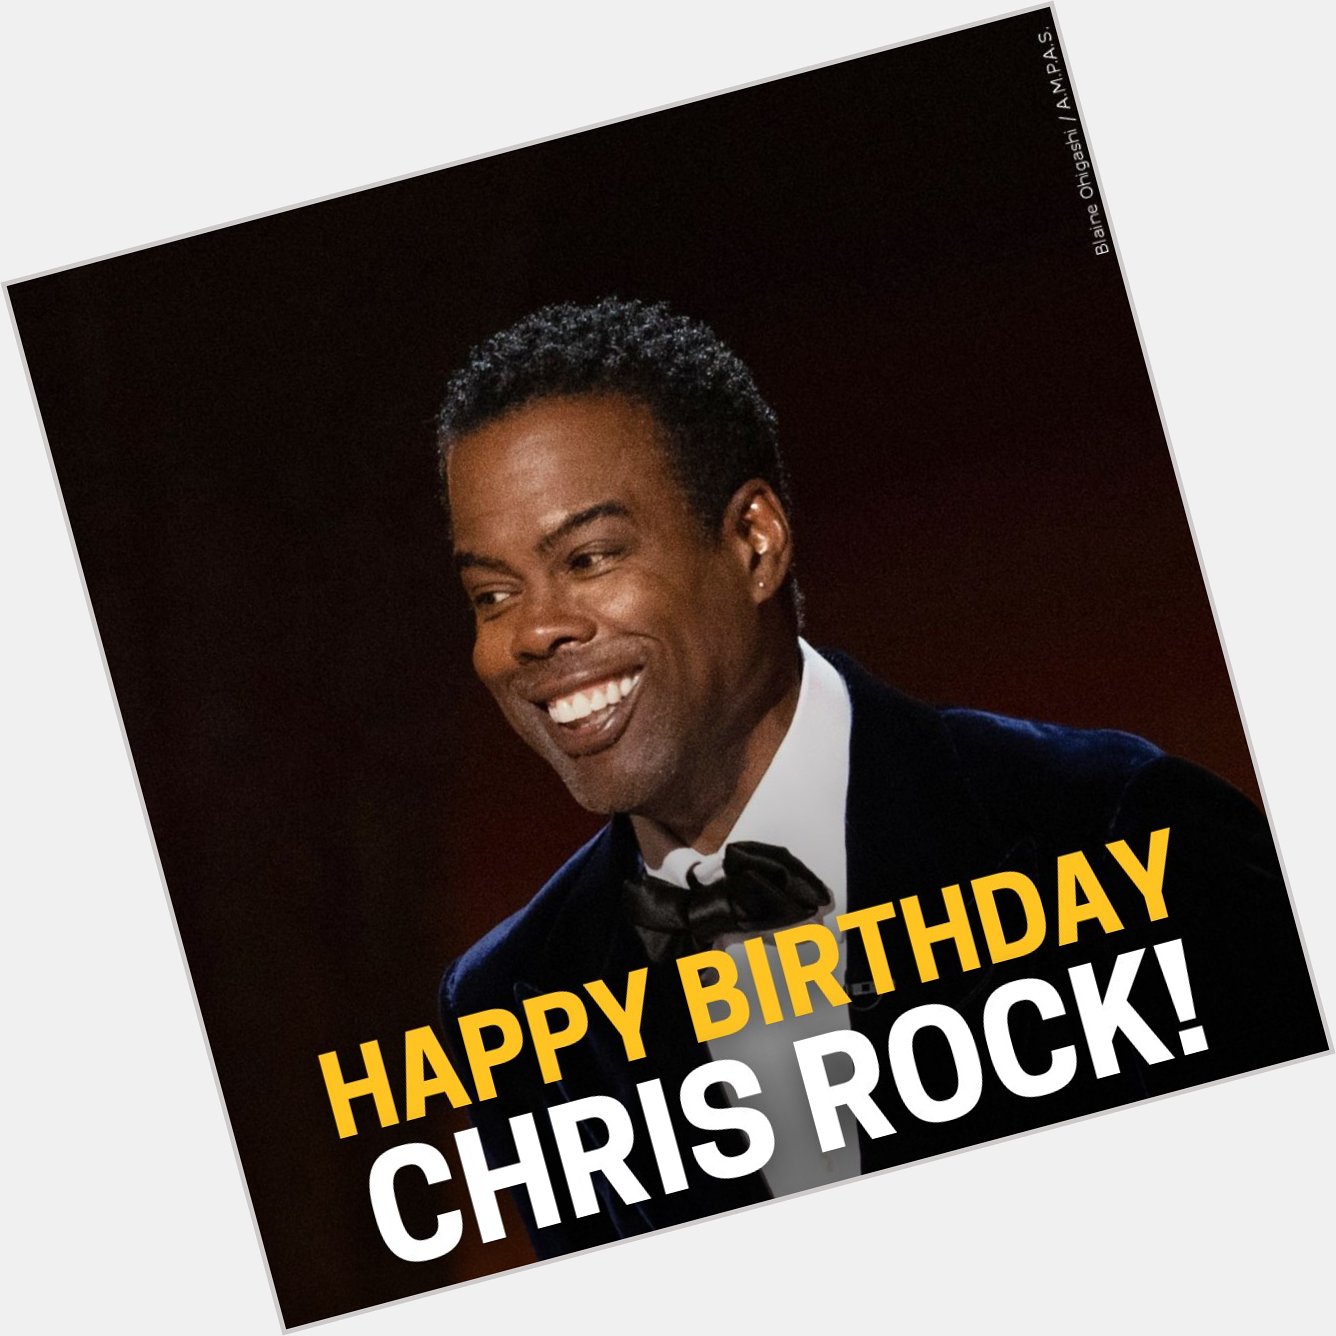 Happy Birthday! What is your favorite Chris Rock movie? 